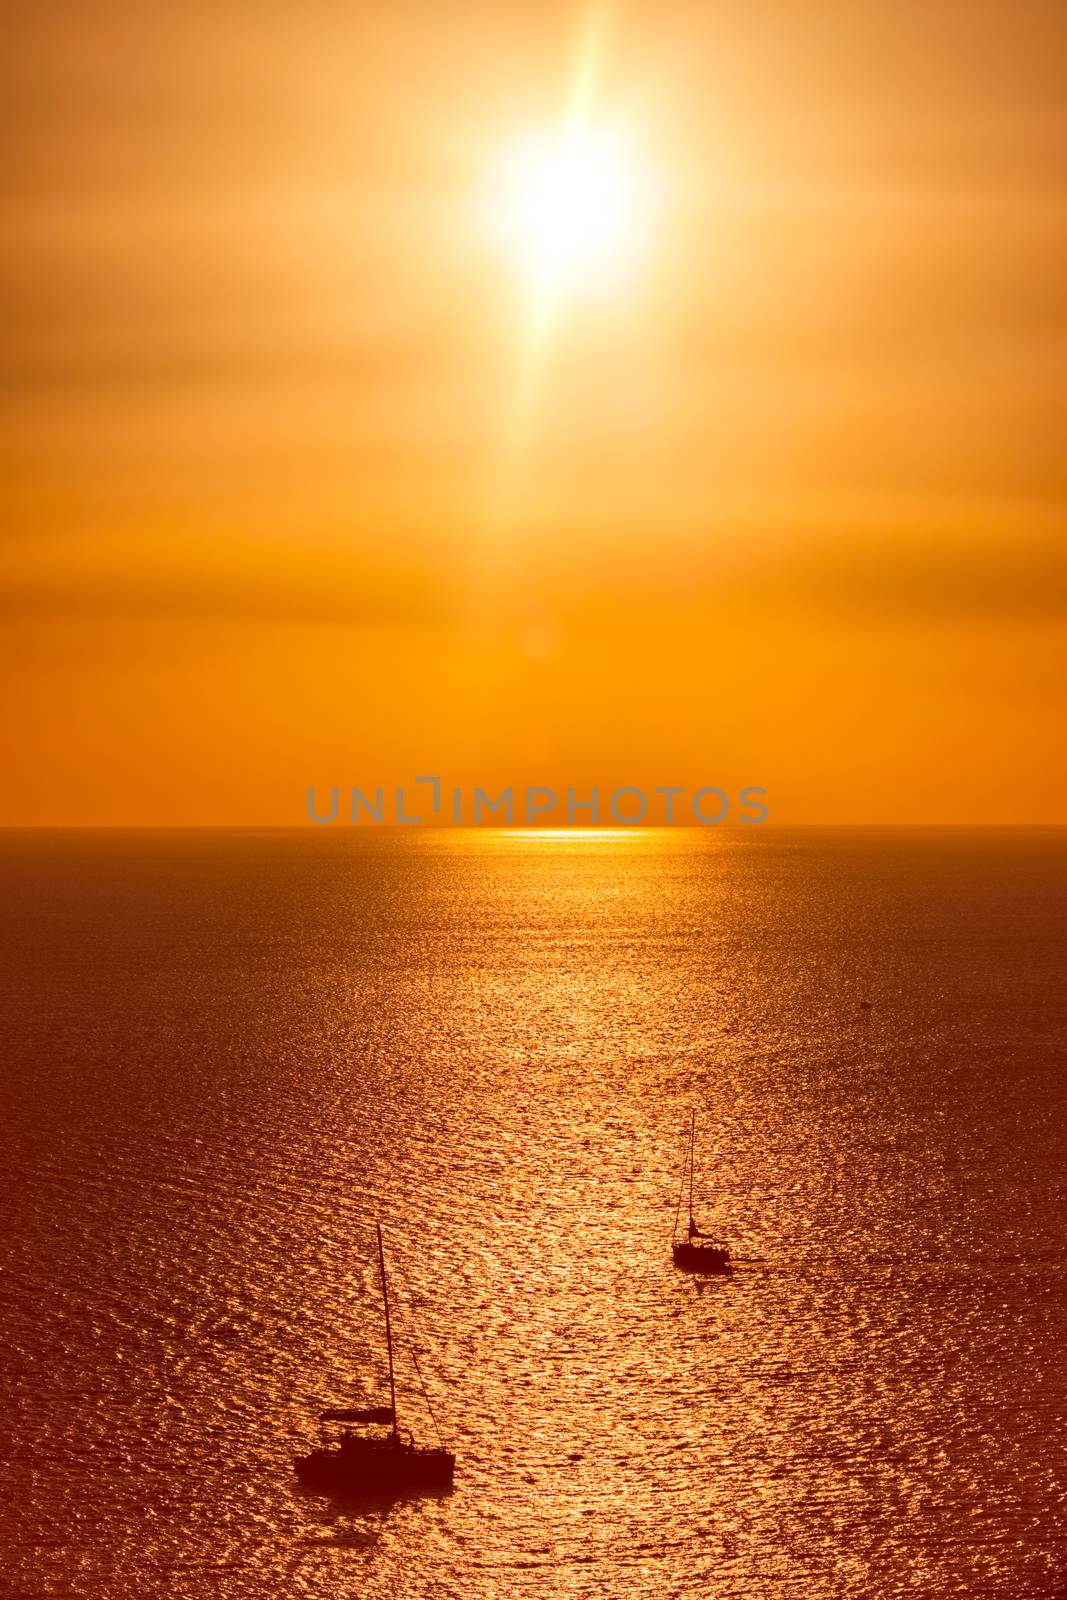 Yacht silhouettes in Aegean sea on sunset. by dimol